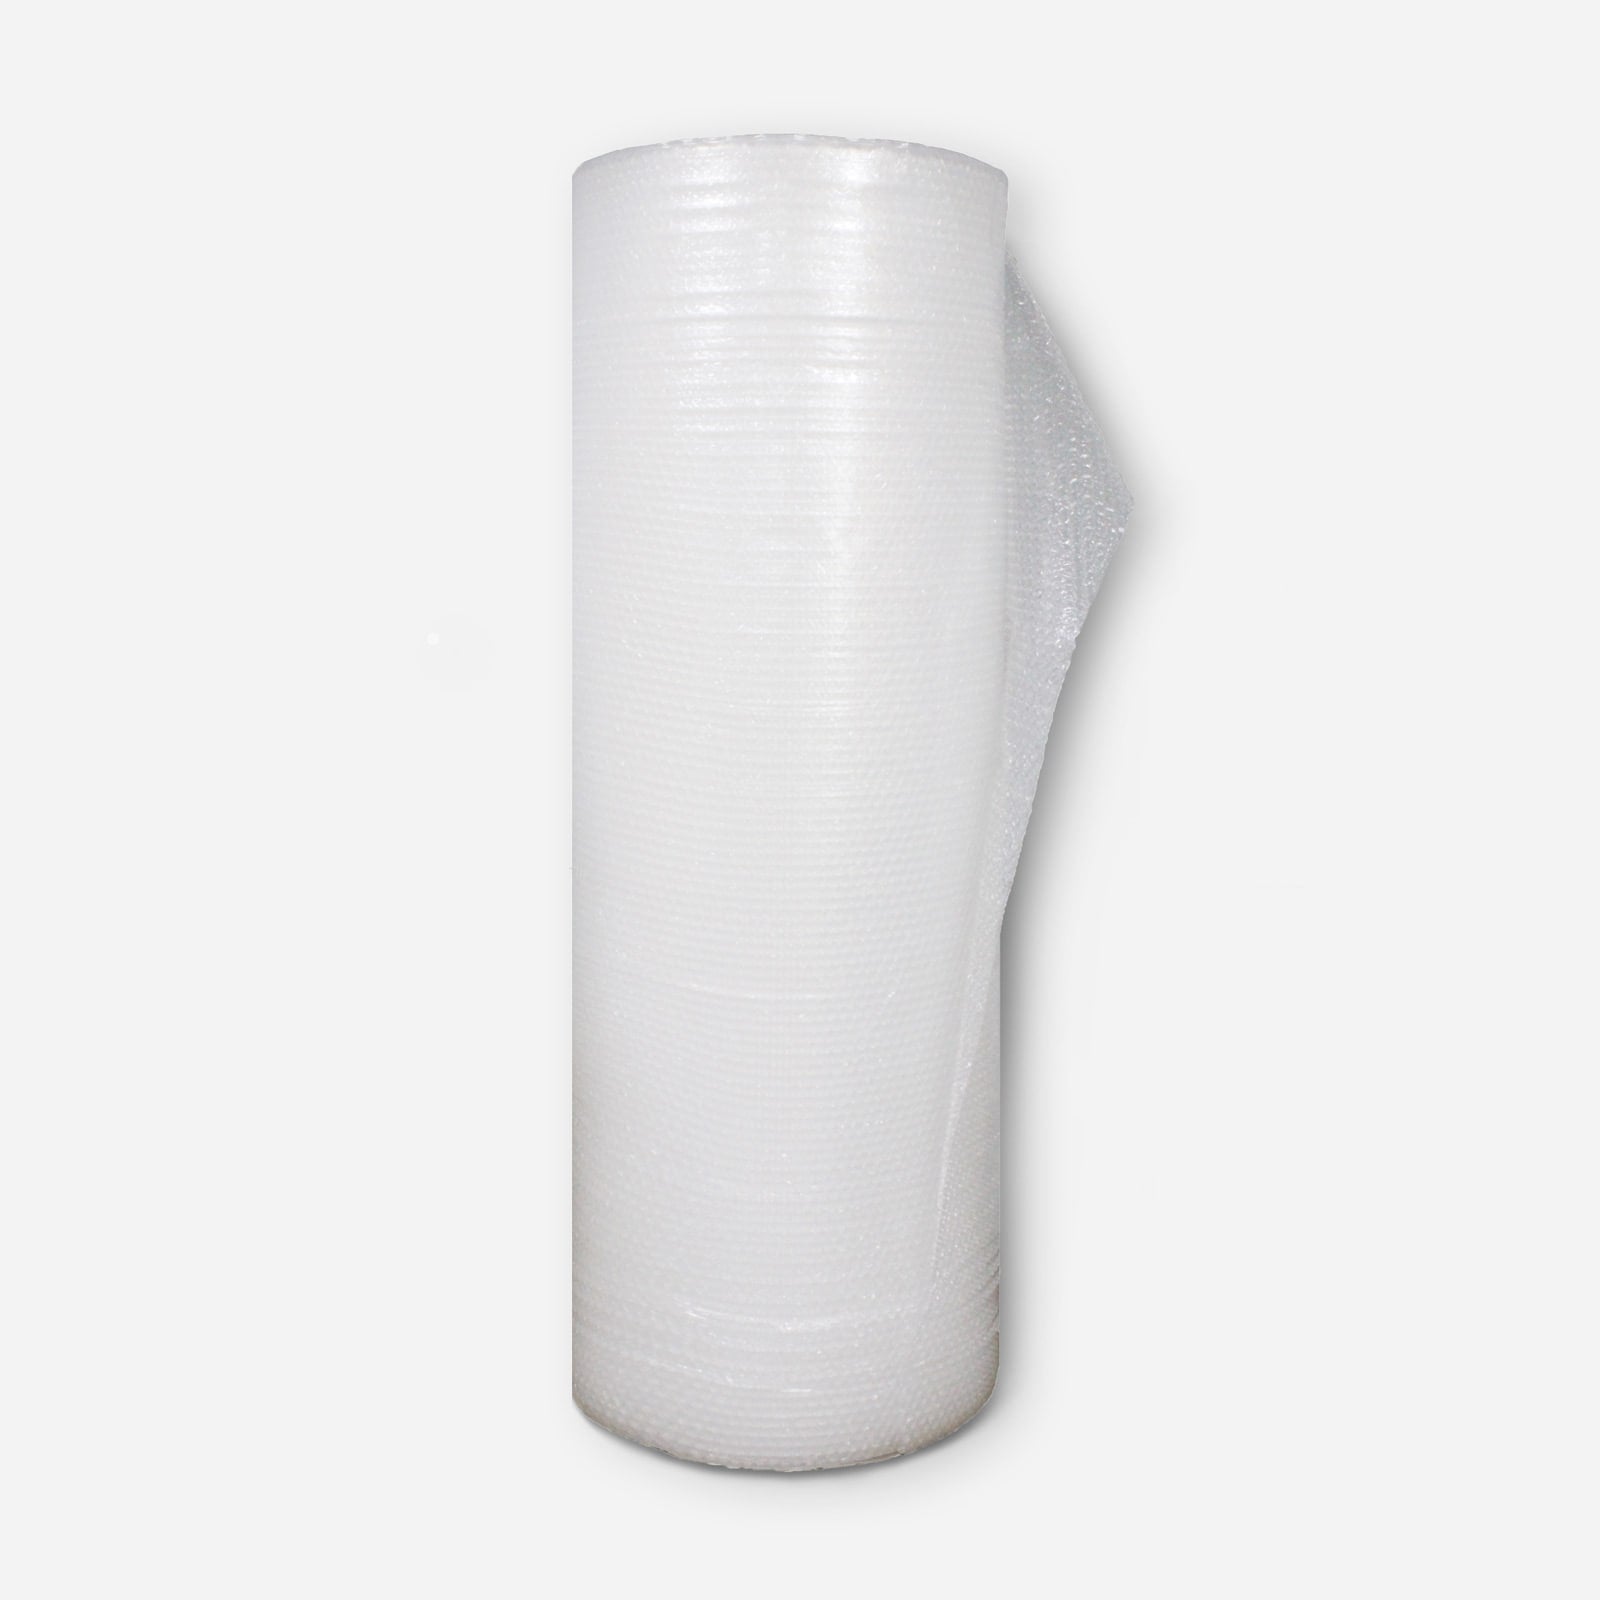 FVIEXE 13.7 Inch x 164 Feet Bubble Cushioning Wrap Roll, Large Bubble Air  Bubbles for Packaging Moving Shipping Delivering with Free Pump, Inflatable